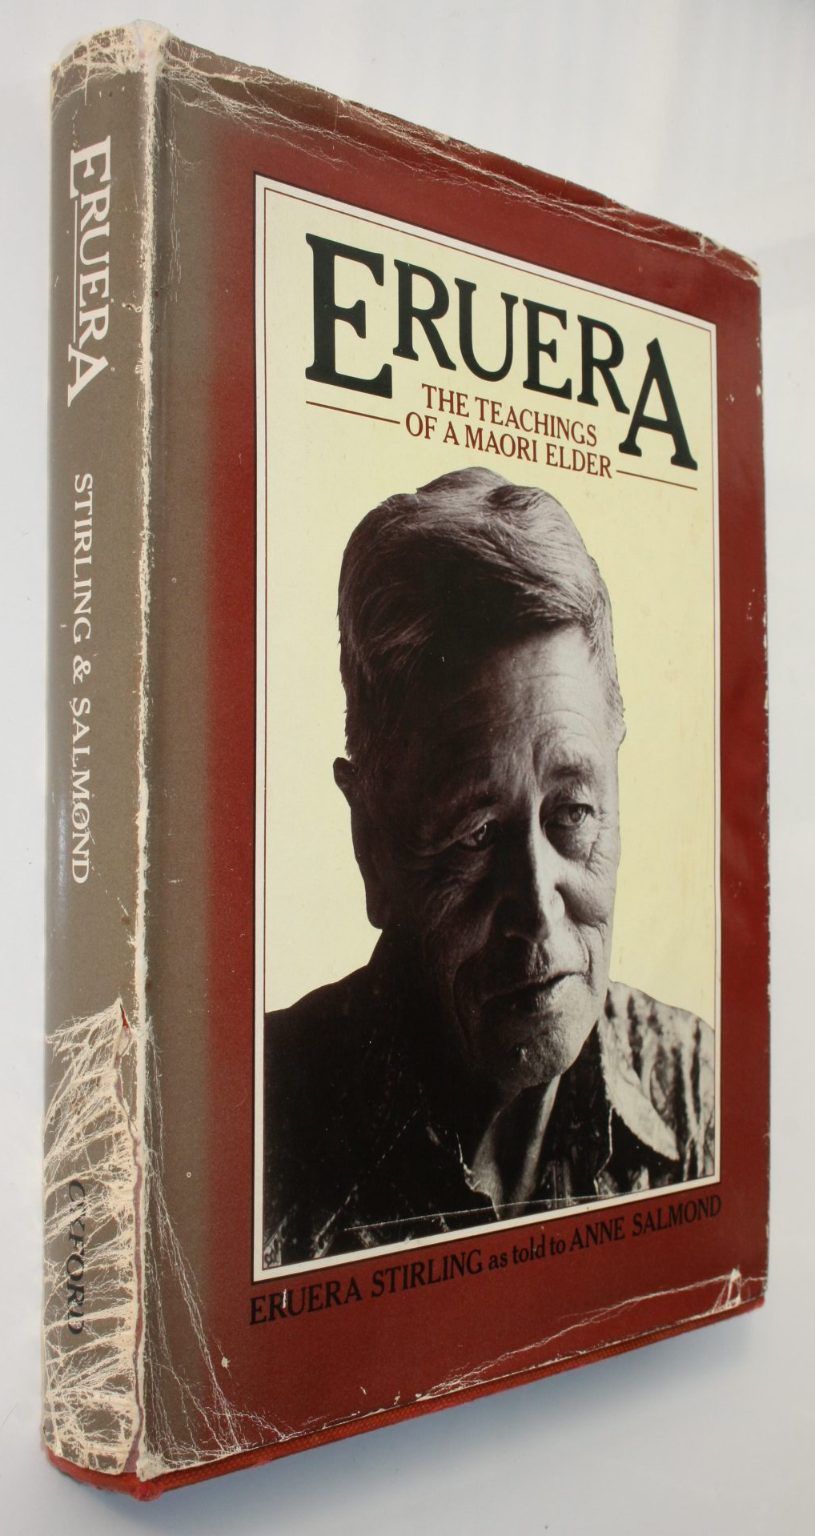 Eruera: The Teachings of a Maori Elder - by Eruera Stirling as told to Anne Salmond. [First Edition]